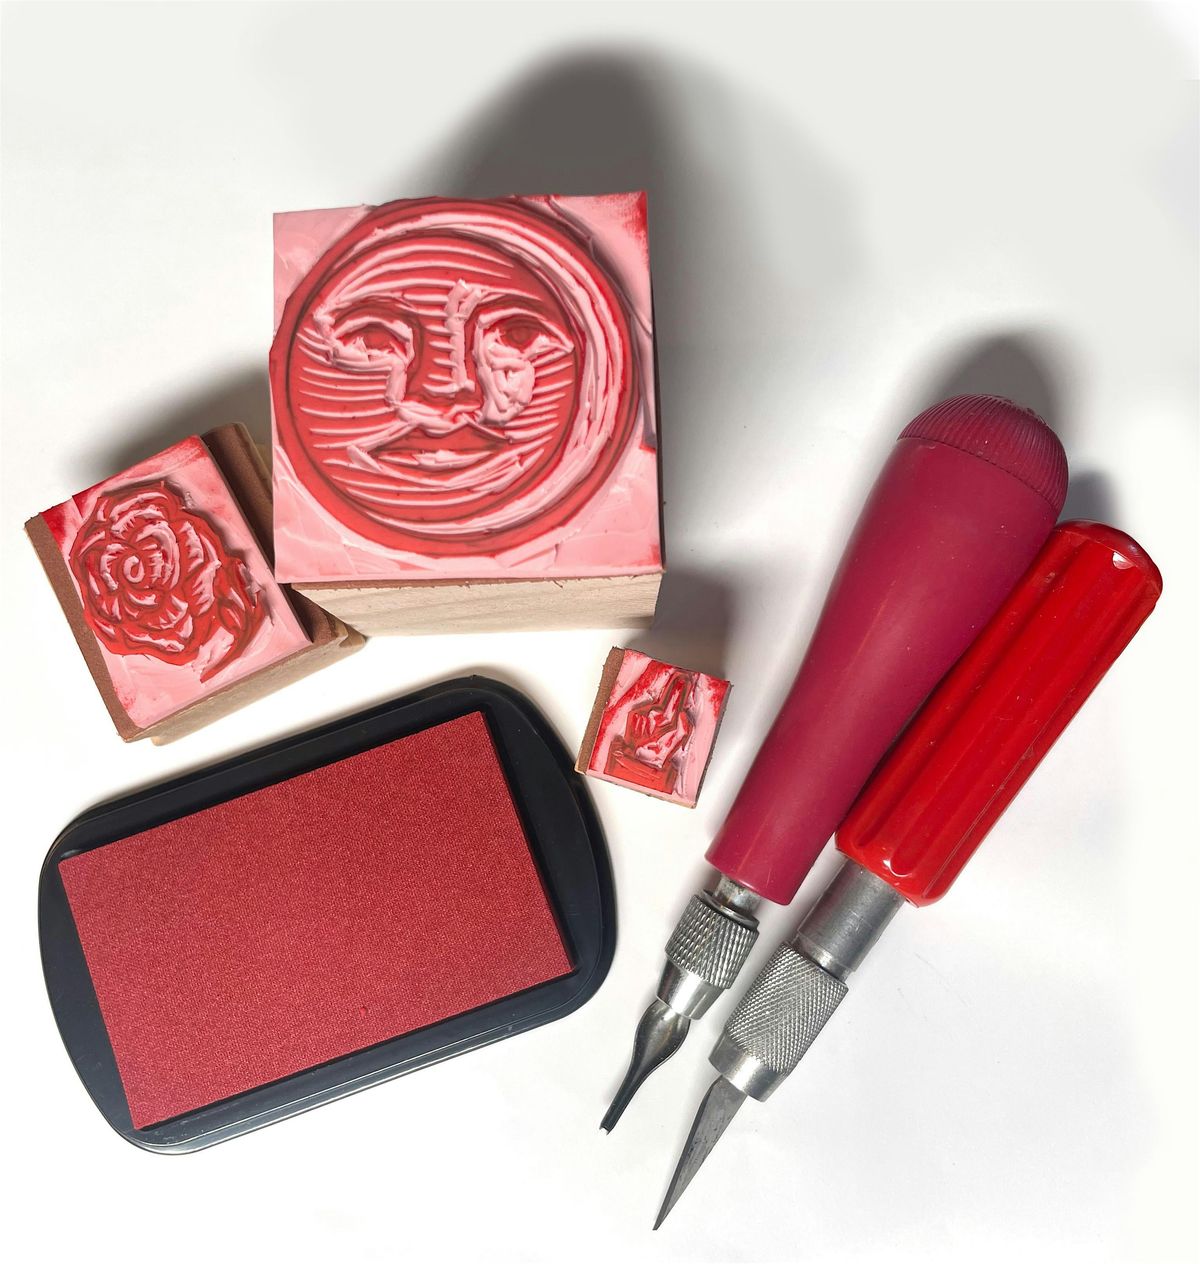 Barnsdall Arts Center: Rubber Stamp Making (Adult Class, 1 Day Workshop)